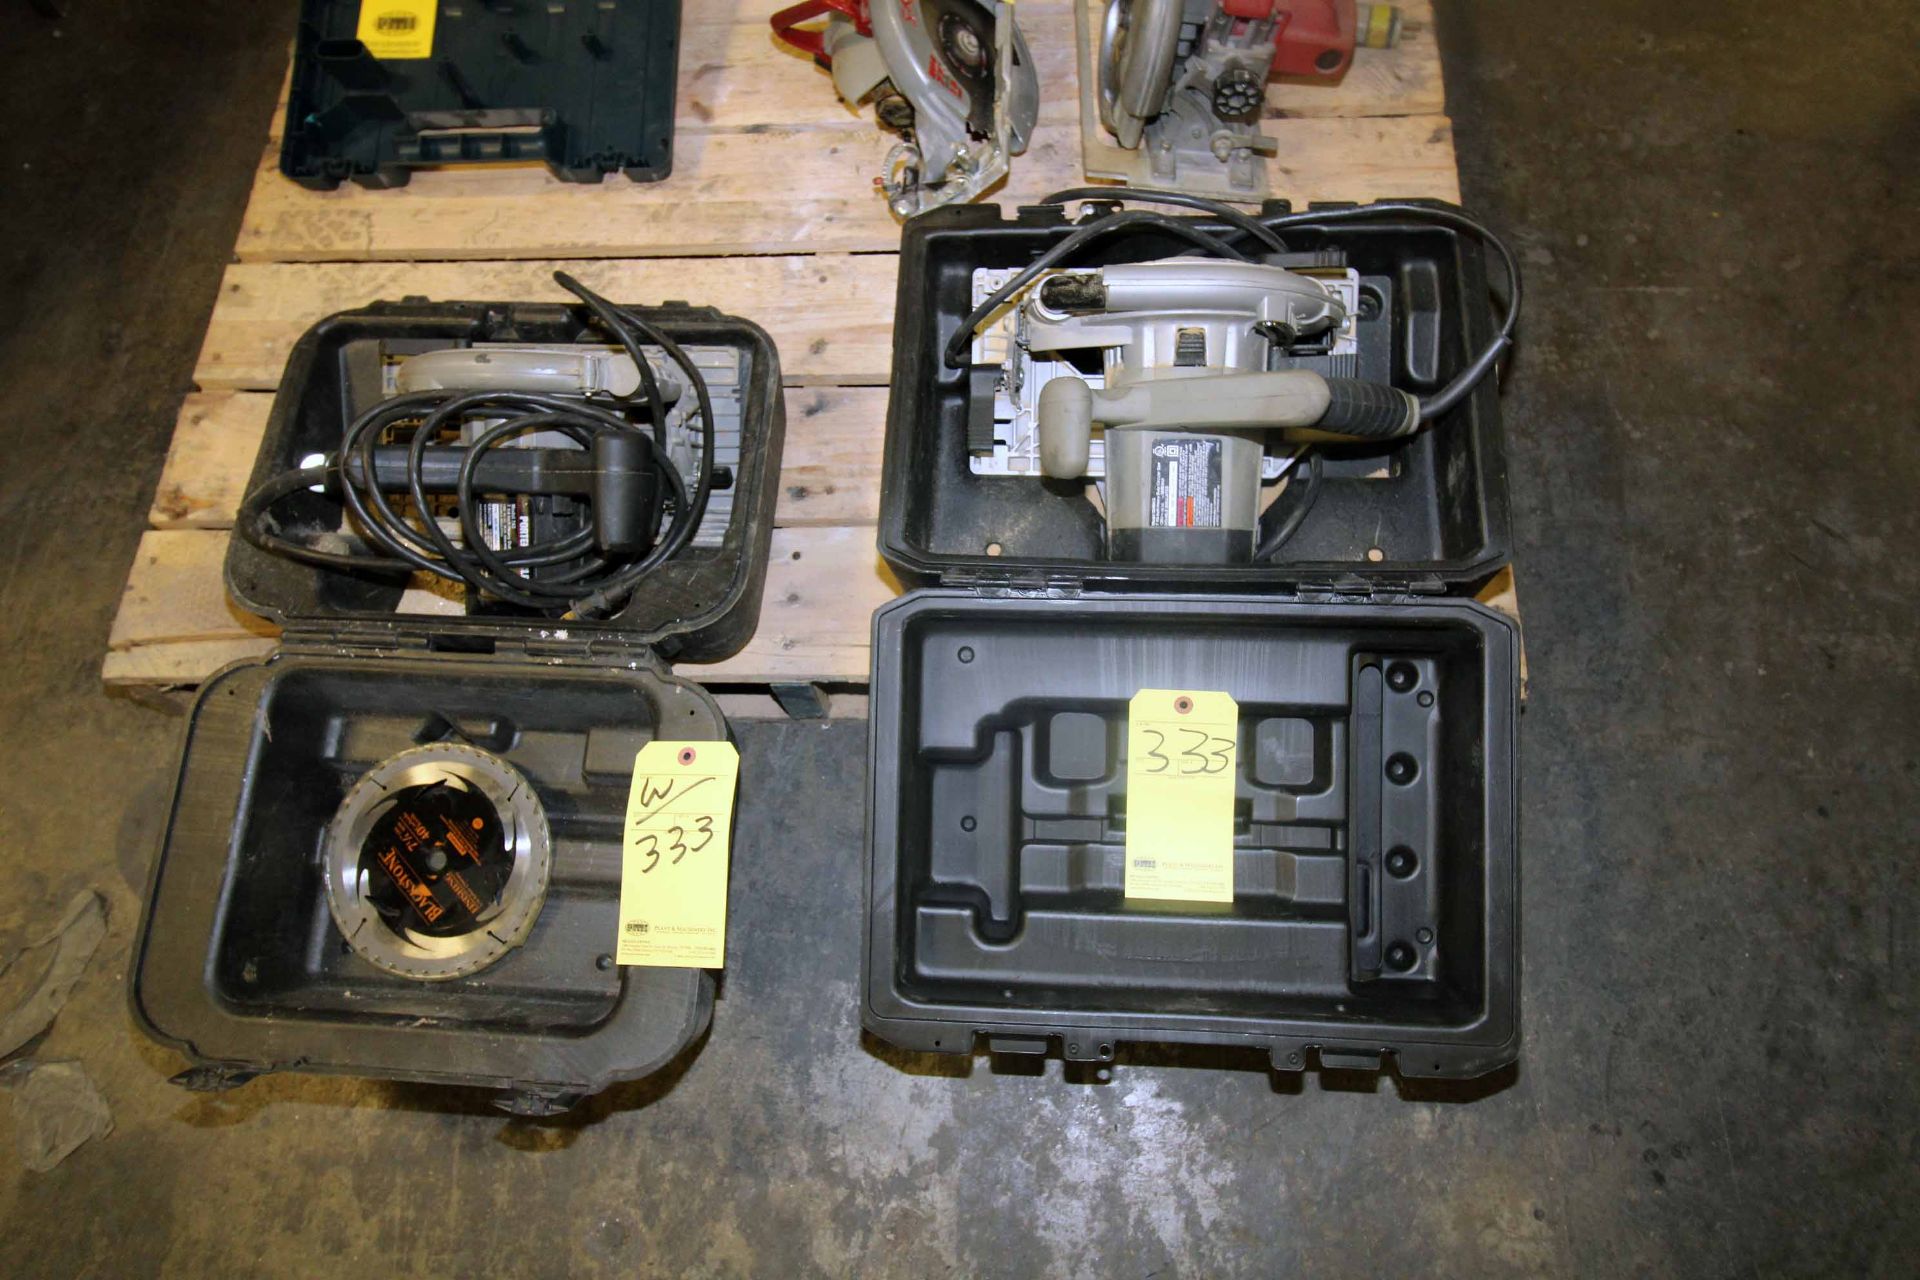 LOT OF CIRCULAR SAWS (2), PORTER CABLE, 7-1/4", w/ case